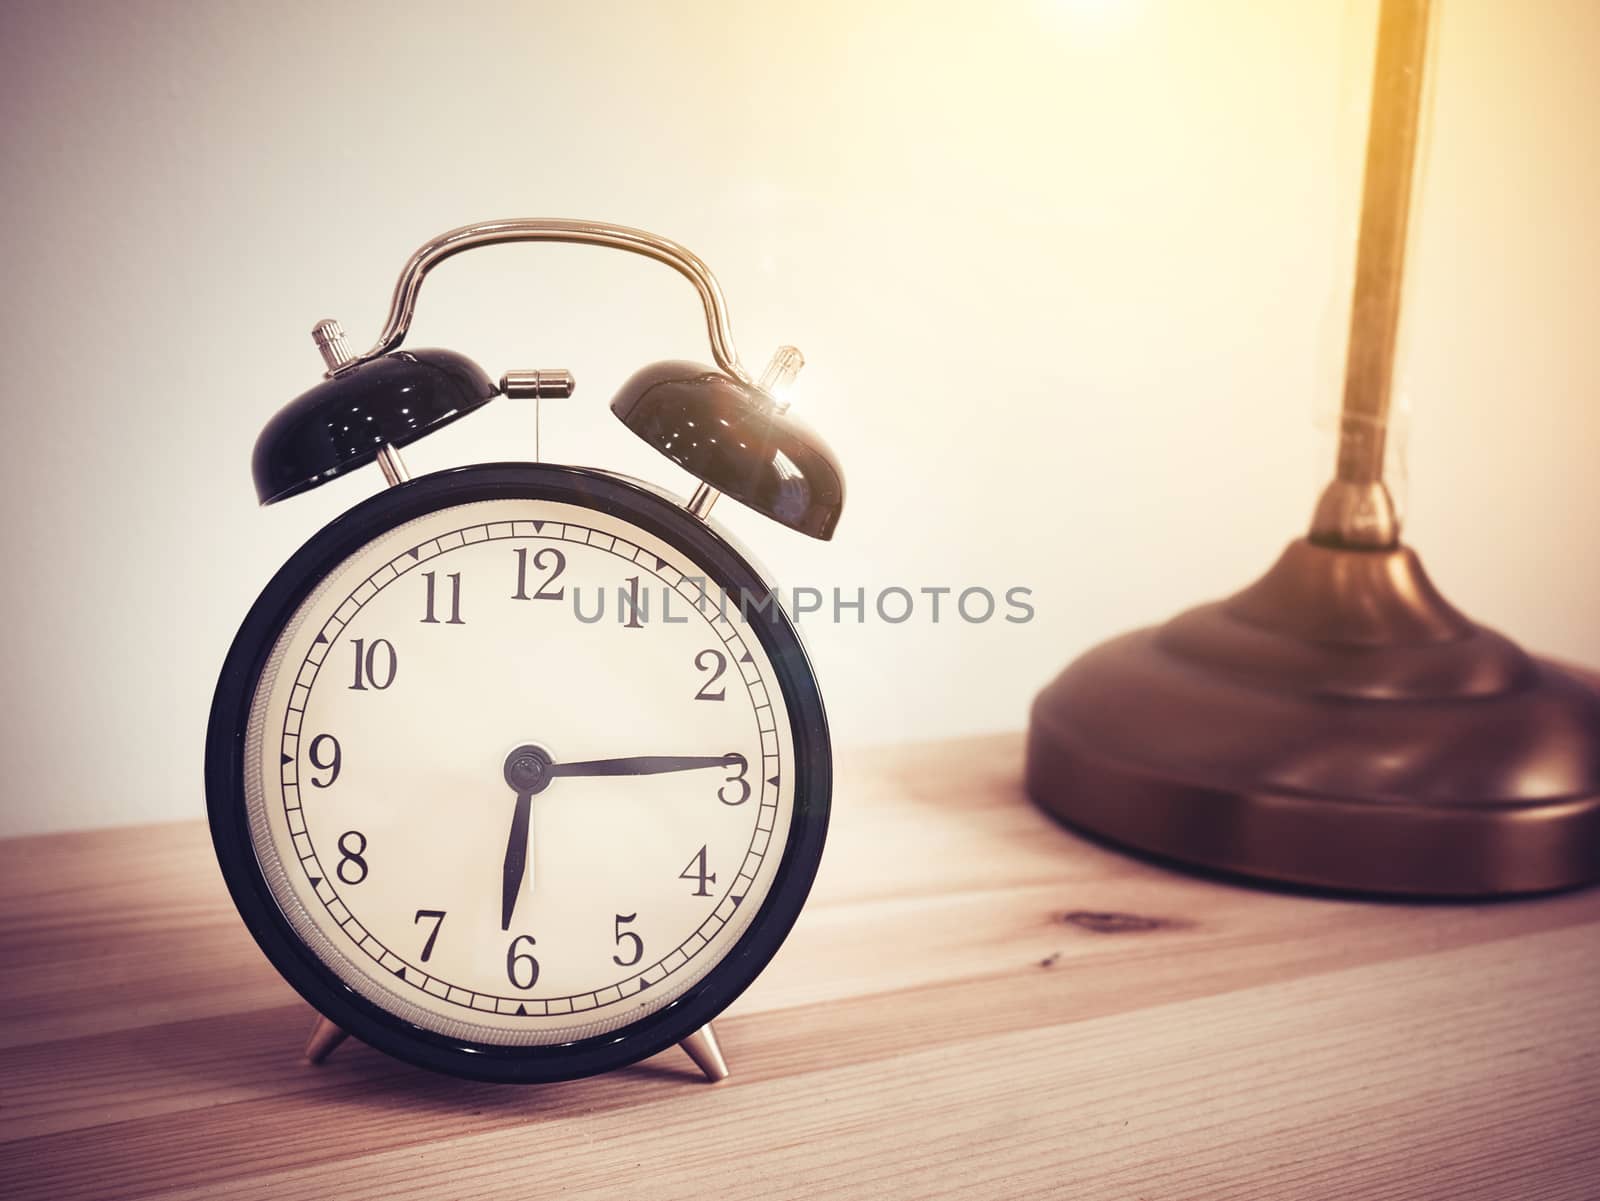 Closeup retro alarm clock on wooden table with copy space, retro style by asiandelight